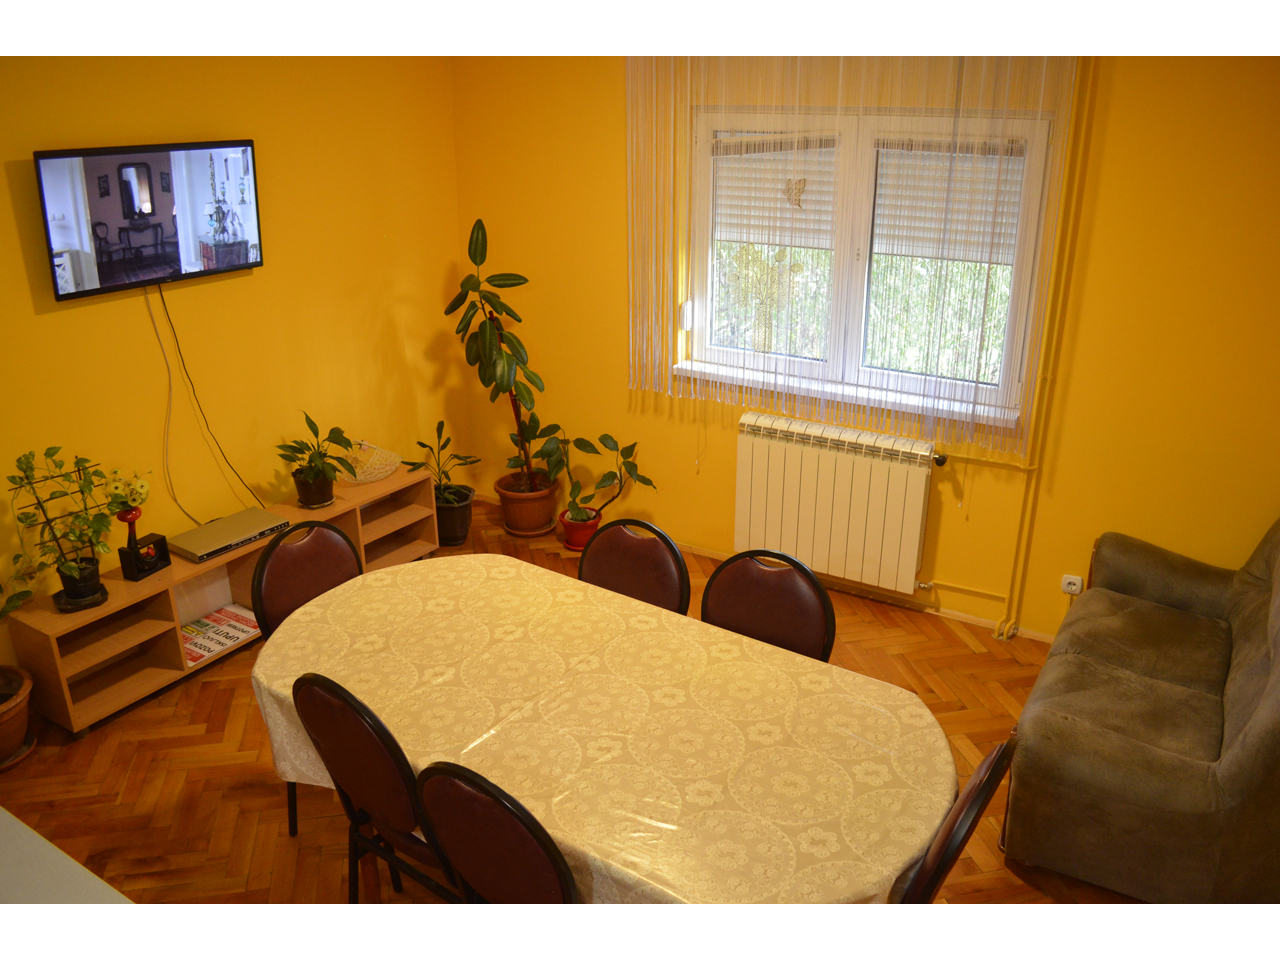 HOME FOR ADULTS AND OLDER PERSONS LUNA Homes and care for the elderly Belgrade - Photo 3